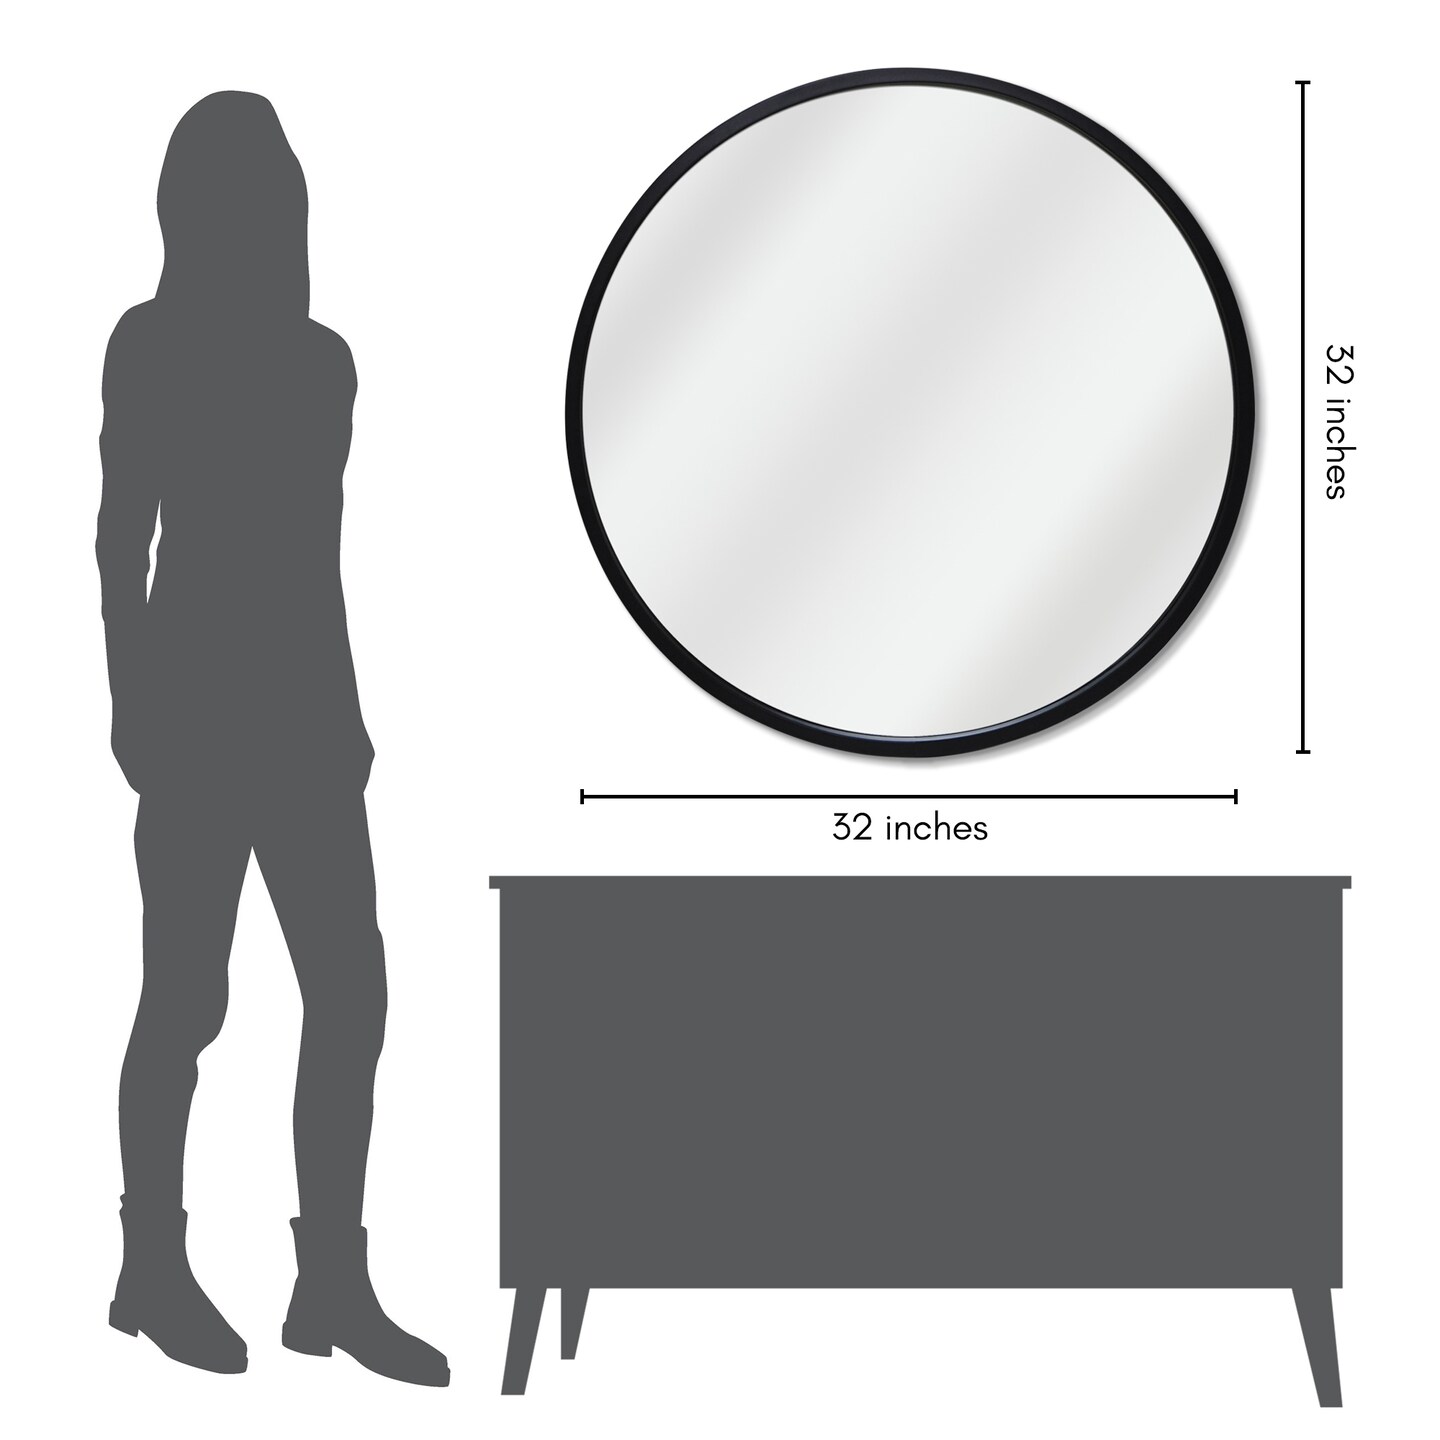 Americanflat Framed Round Mirror - Circle Mirror for Bathroom, Bedroom, Entryway, Living Room - Large Black Circle Mirror for Wall D&#xE9;cor